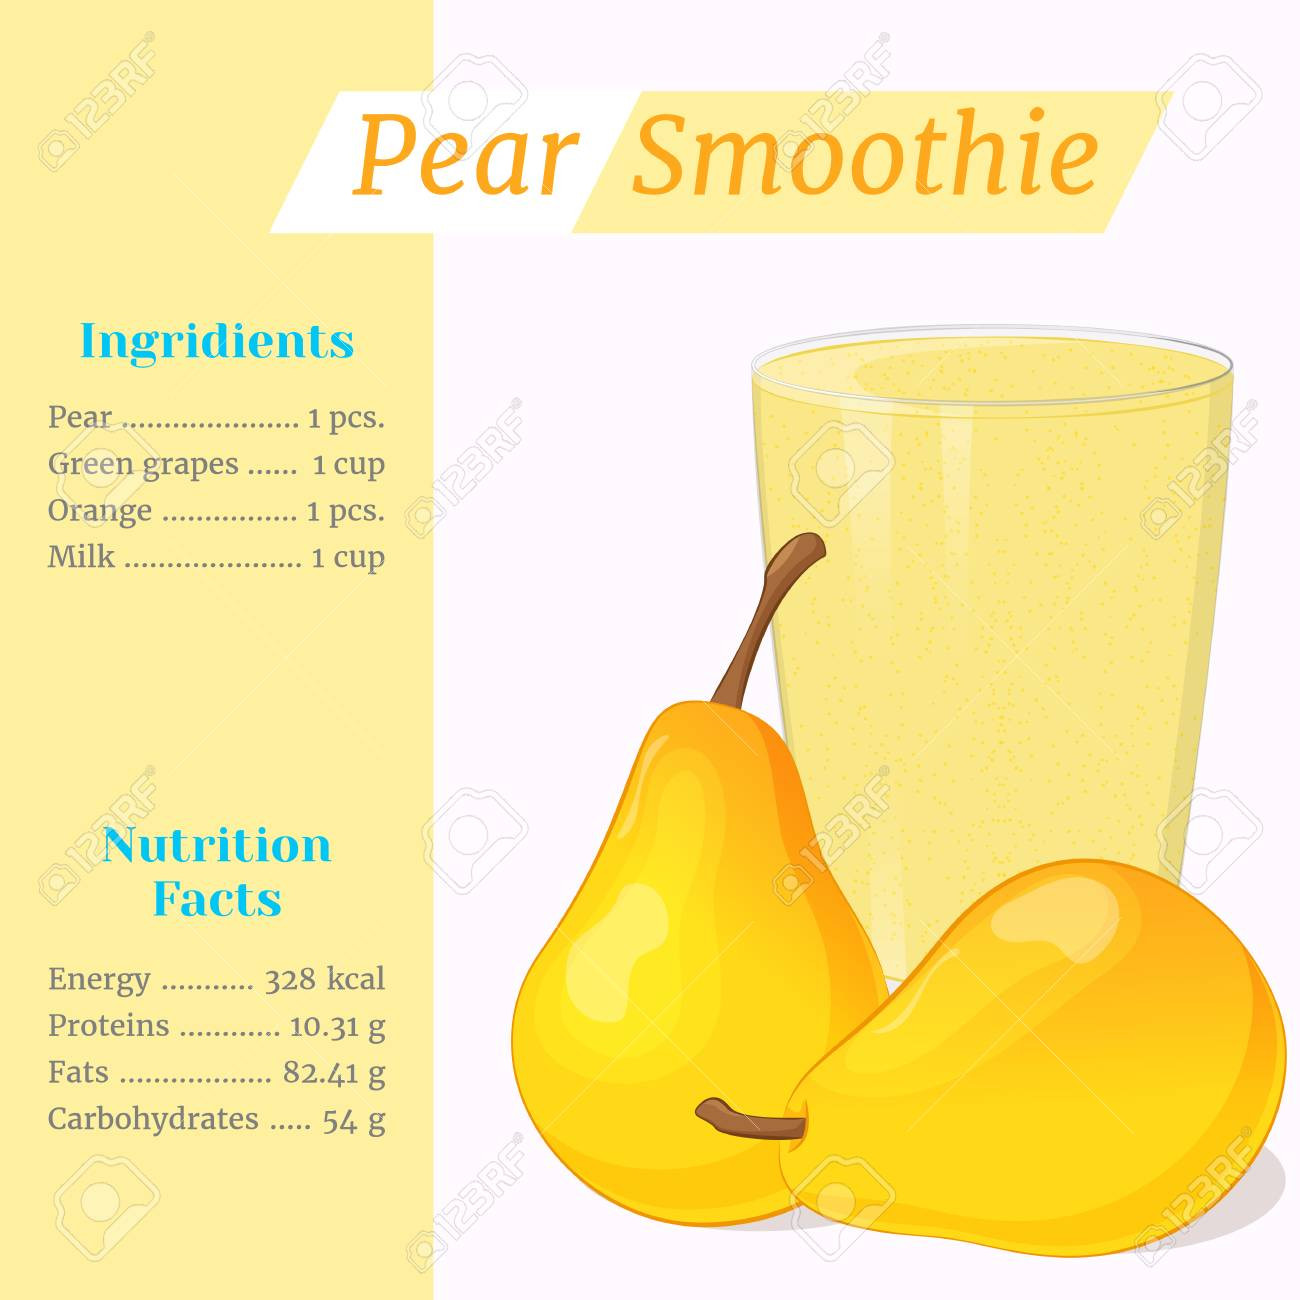 Nutritionist Smoothie Recipes
 Smoothie recipes with nutrition facts akzamkowy